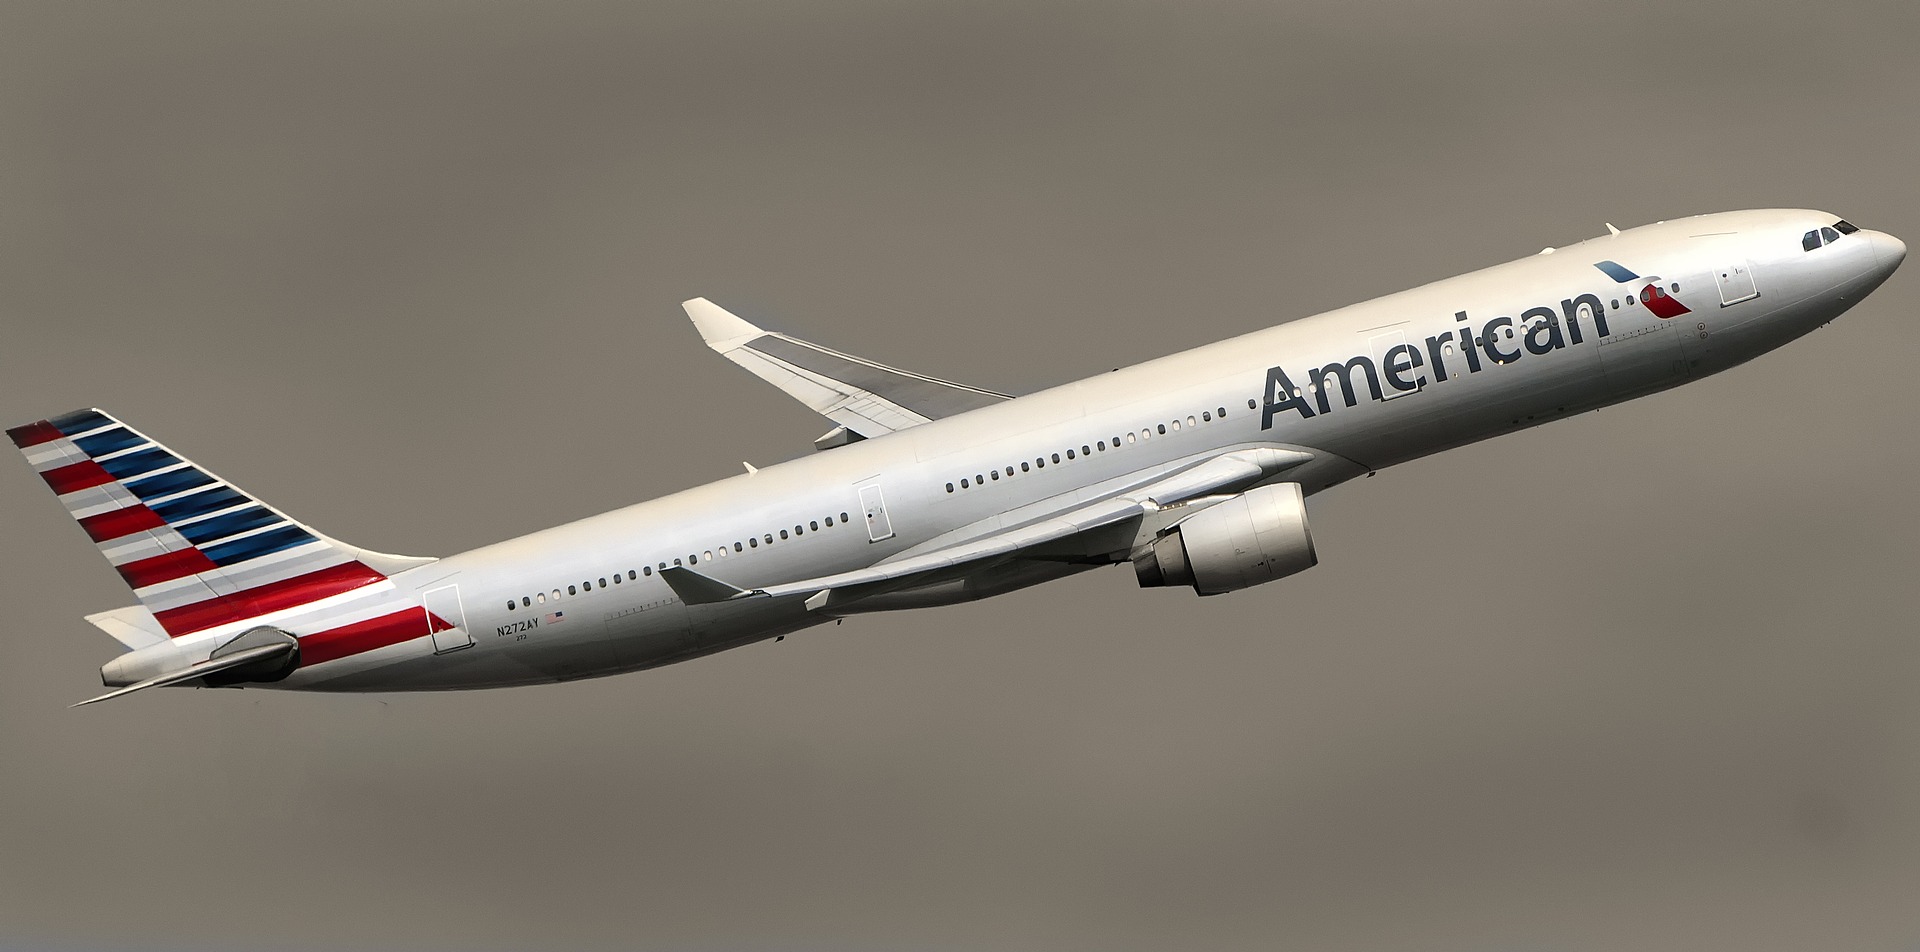   american airlines   hippa  